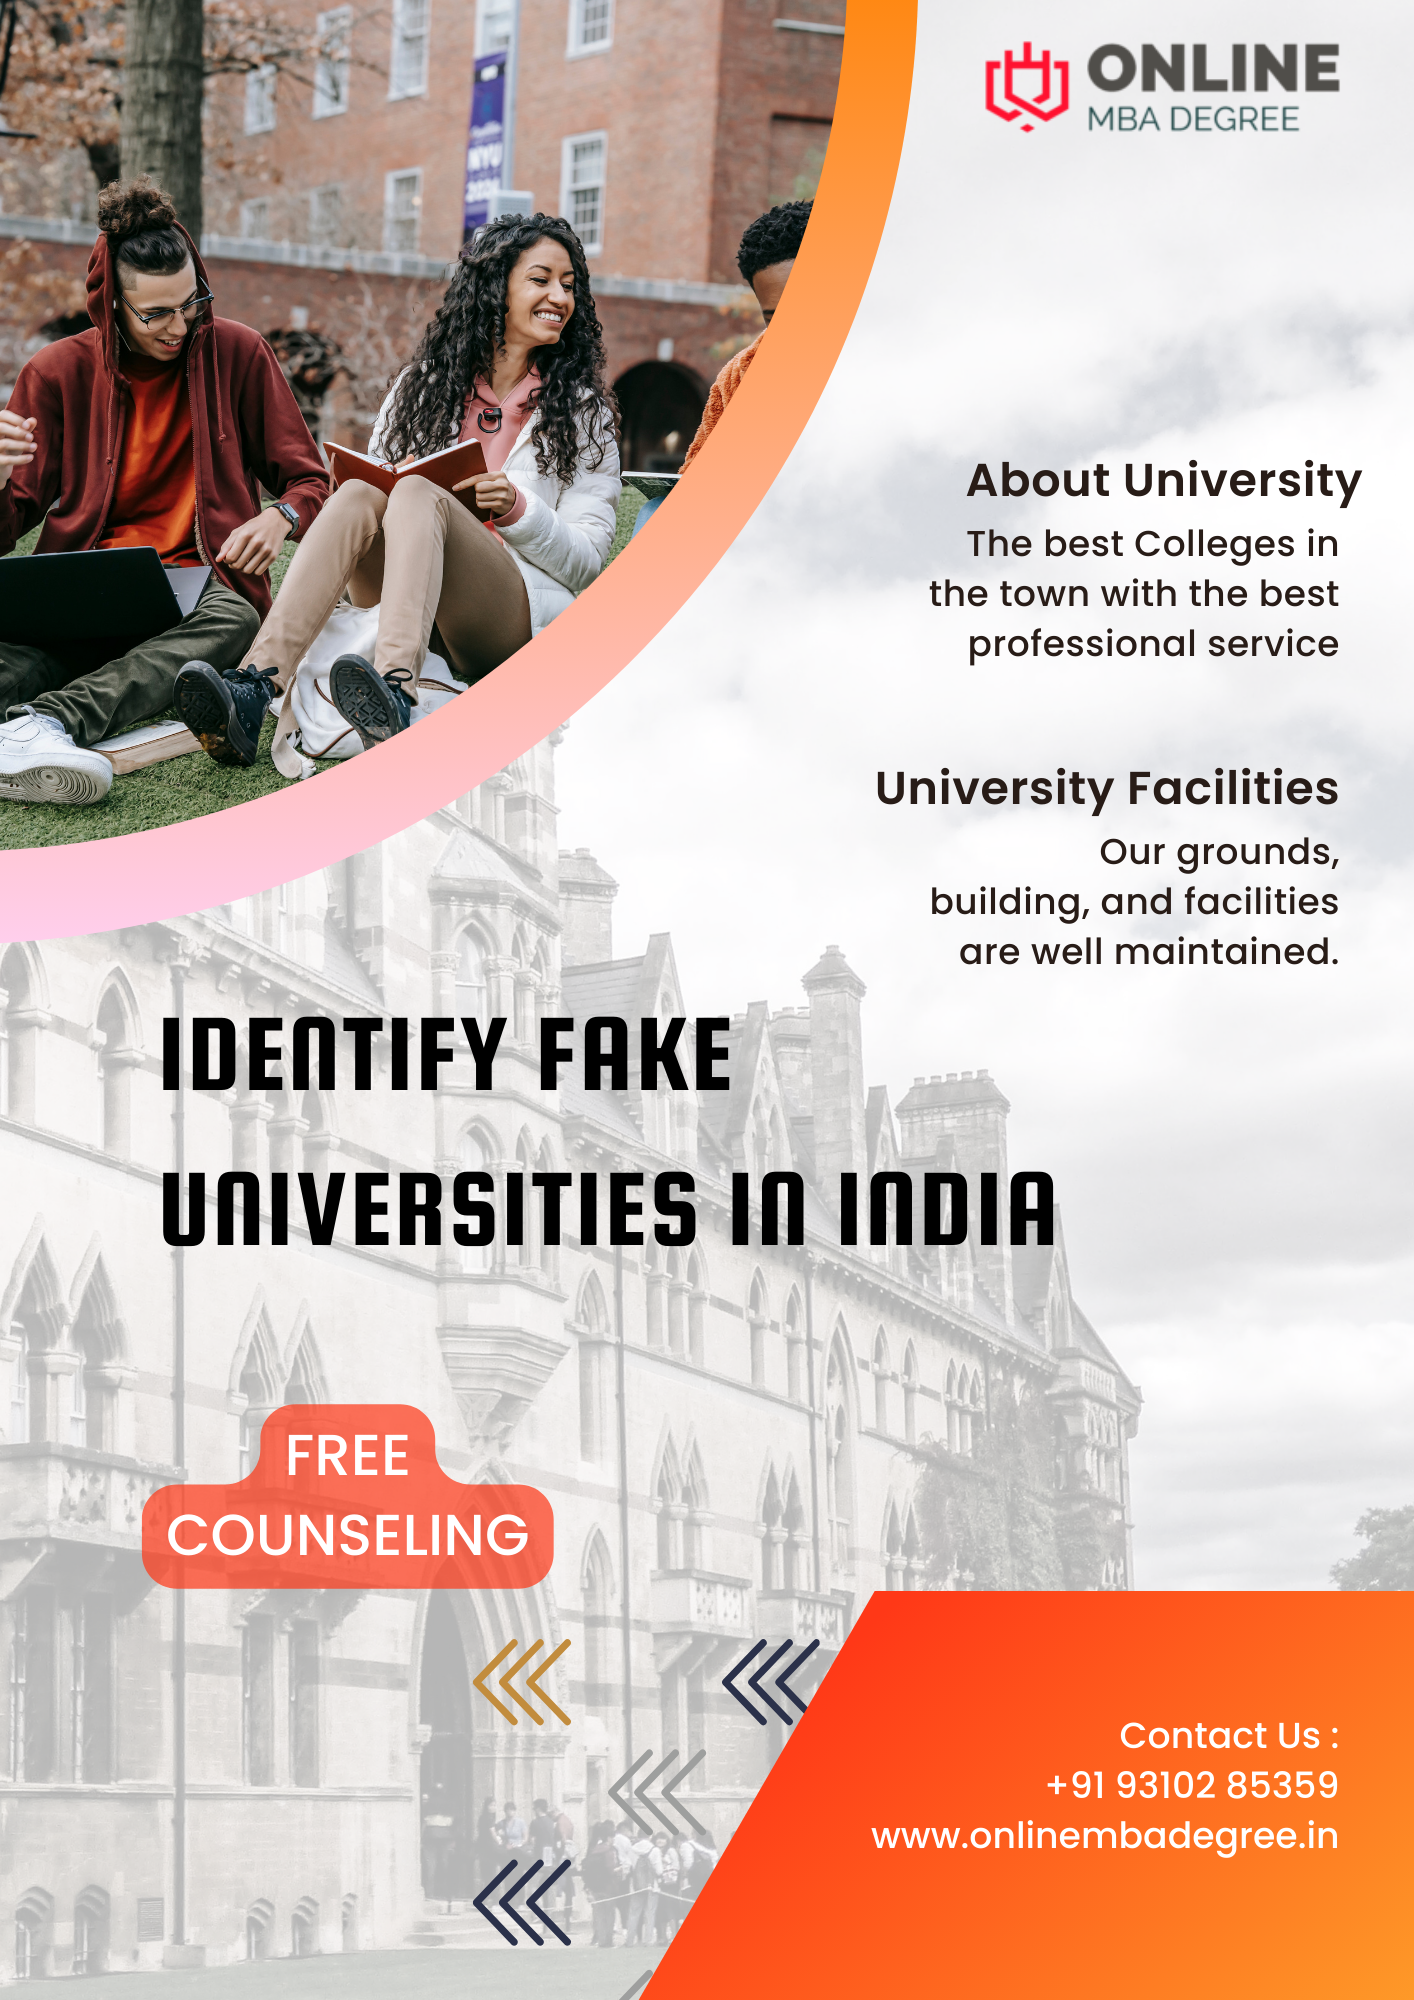 Checklist to Identify Fake Universities In India